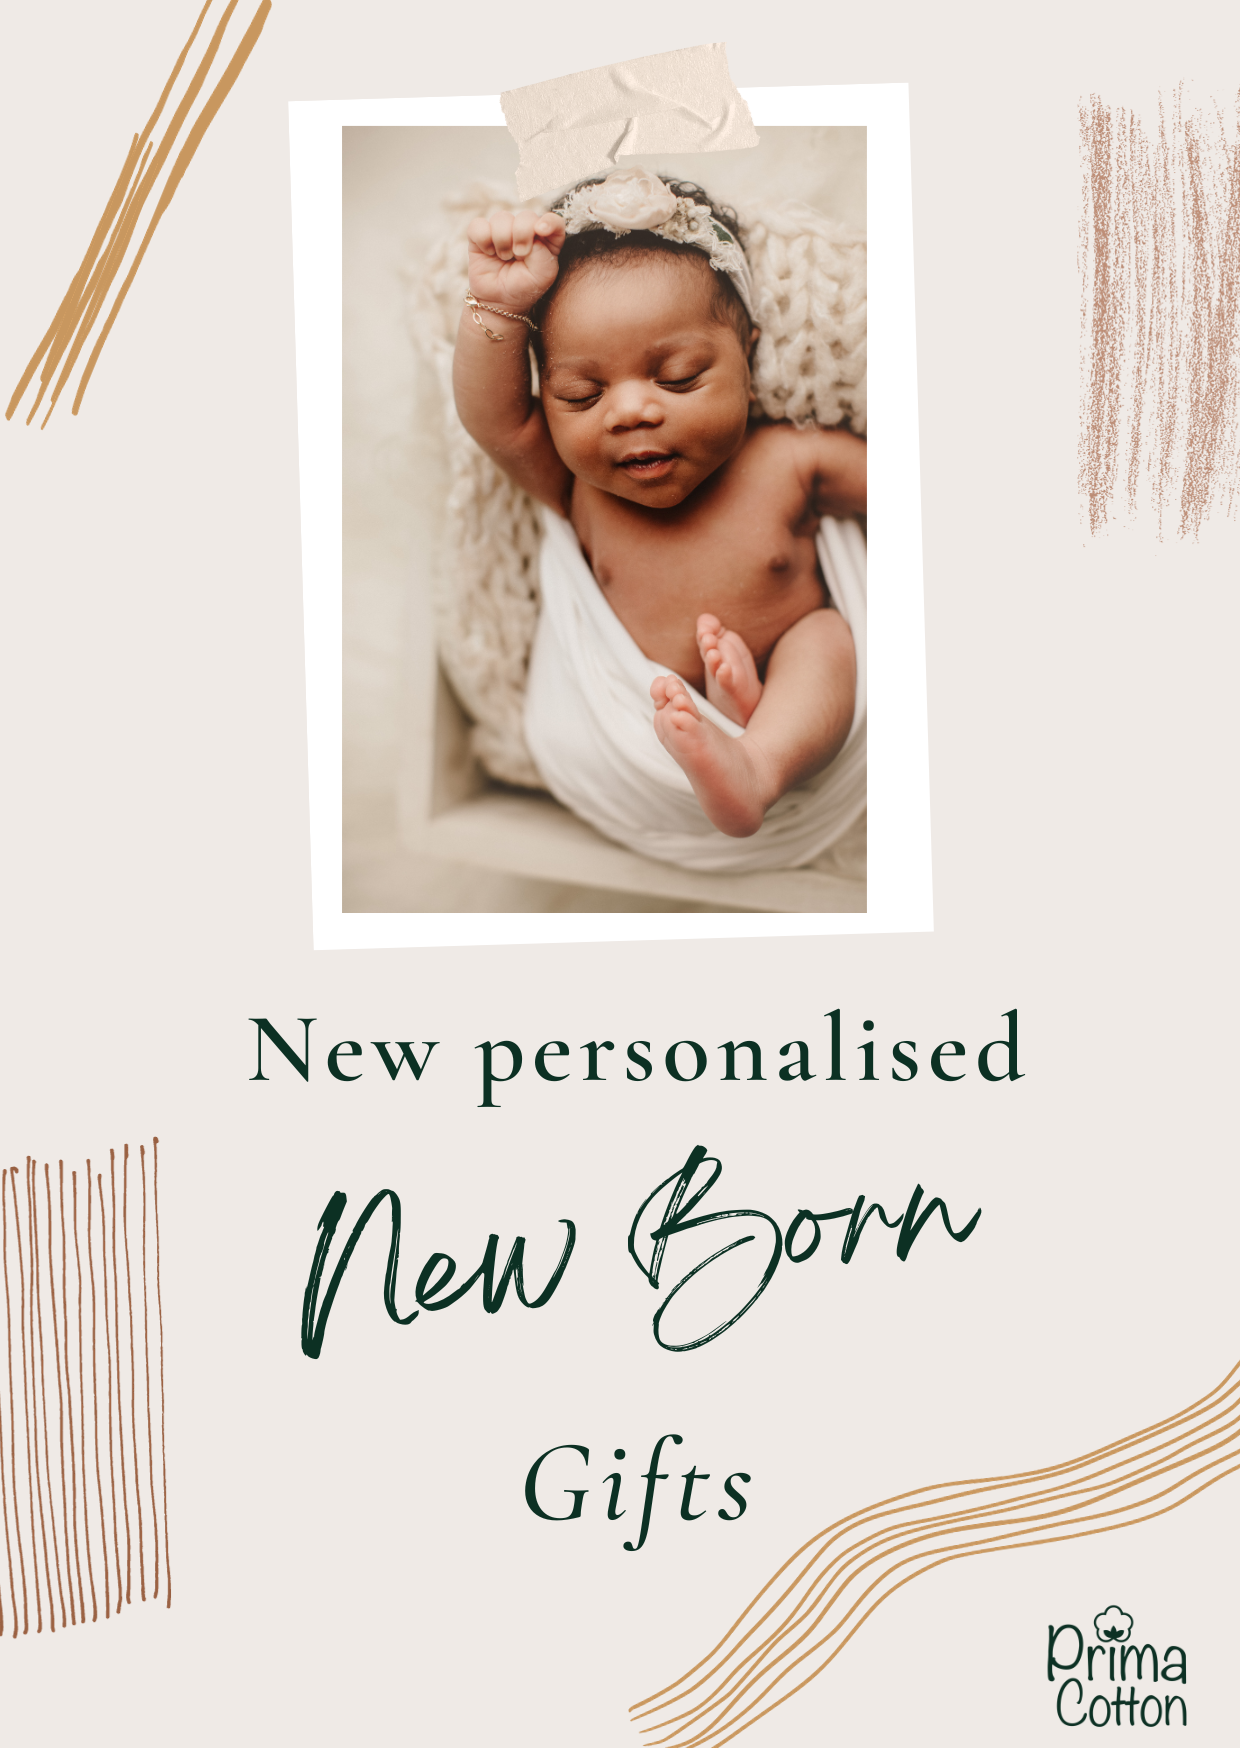 Personalized specialized gifts collection